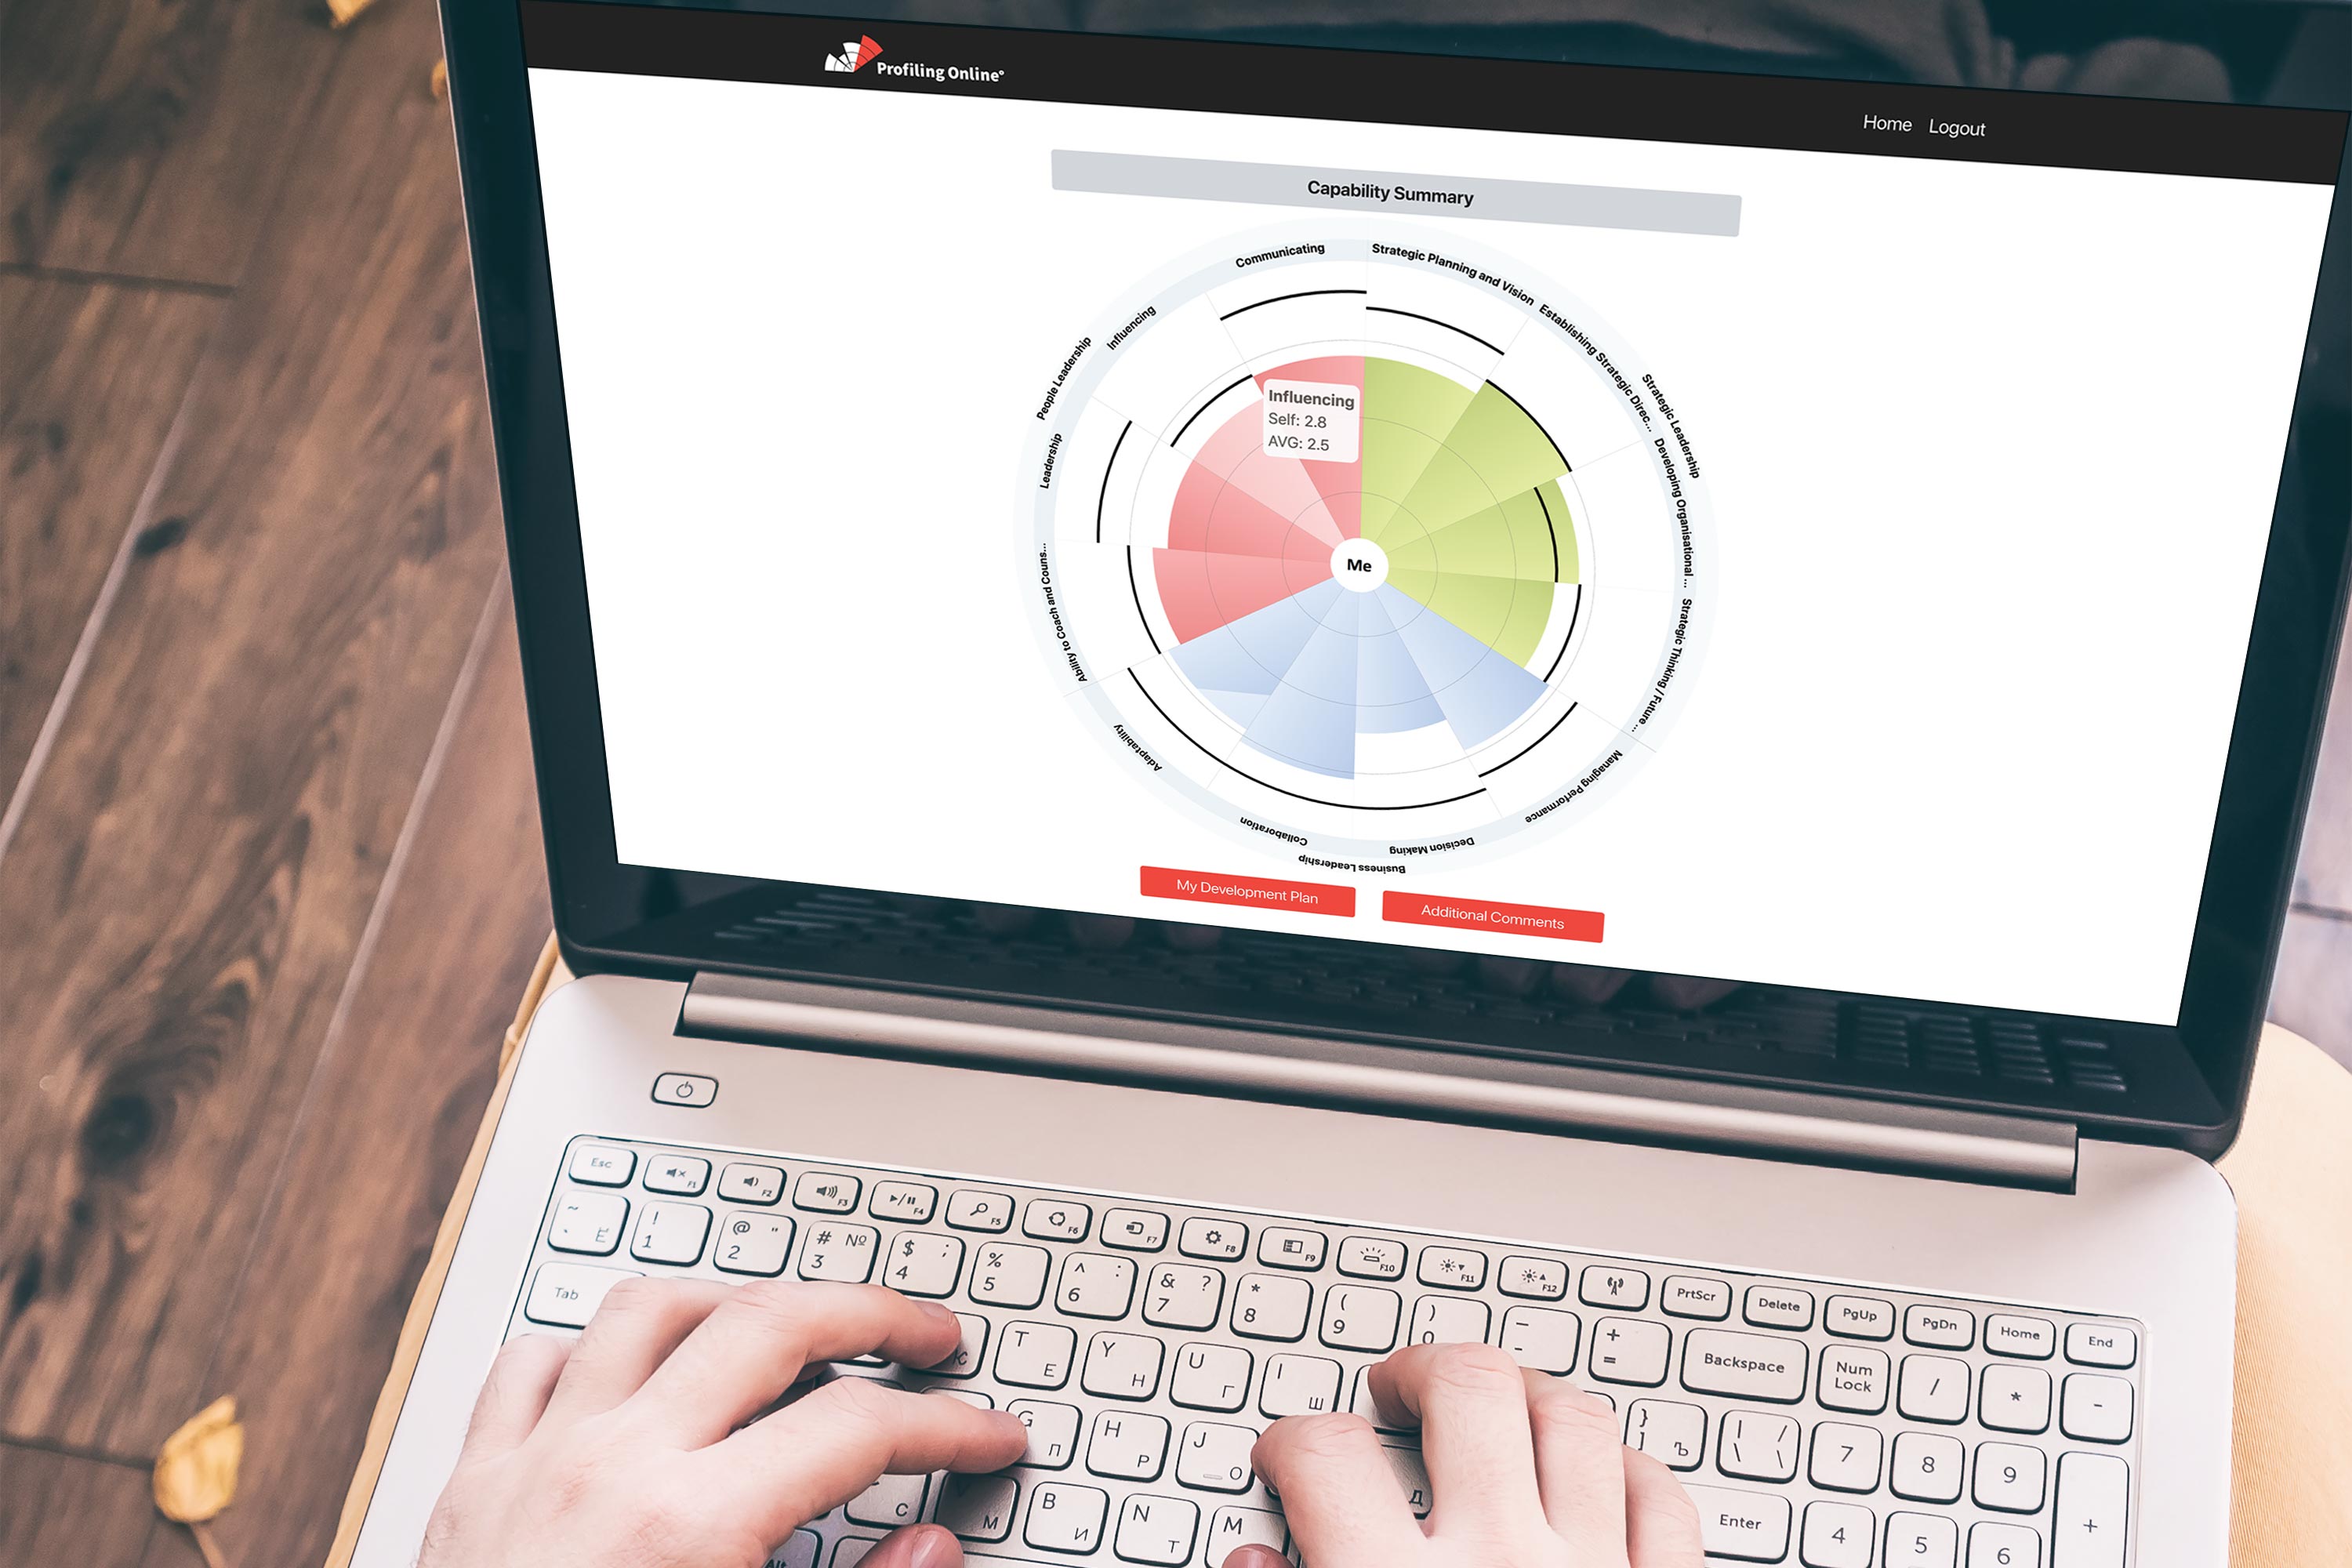 Our online, interactive reports are simple to use and provide powerful, actionable insights. They have been built specifically for 360-Degree feedback and competency assessments.